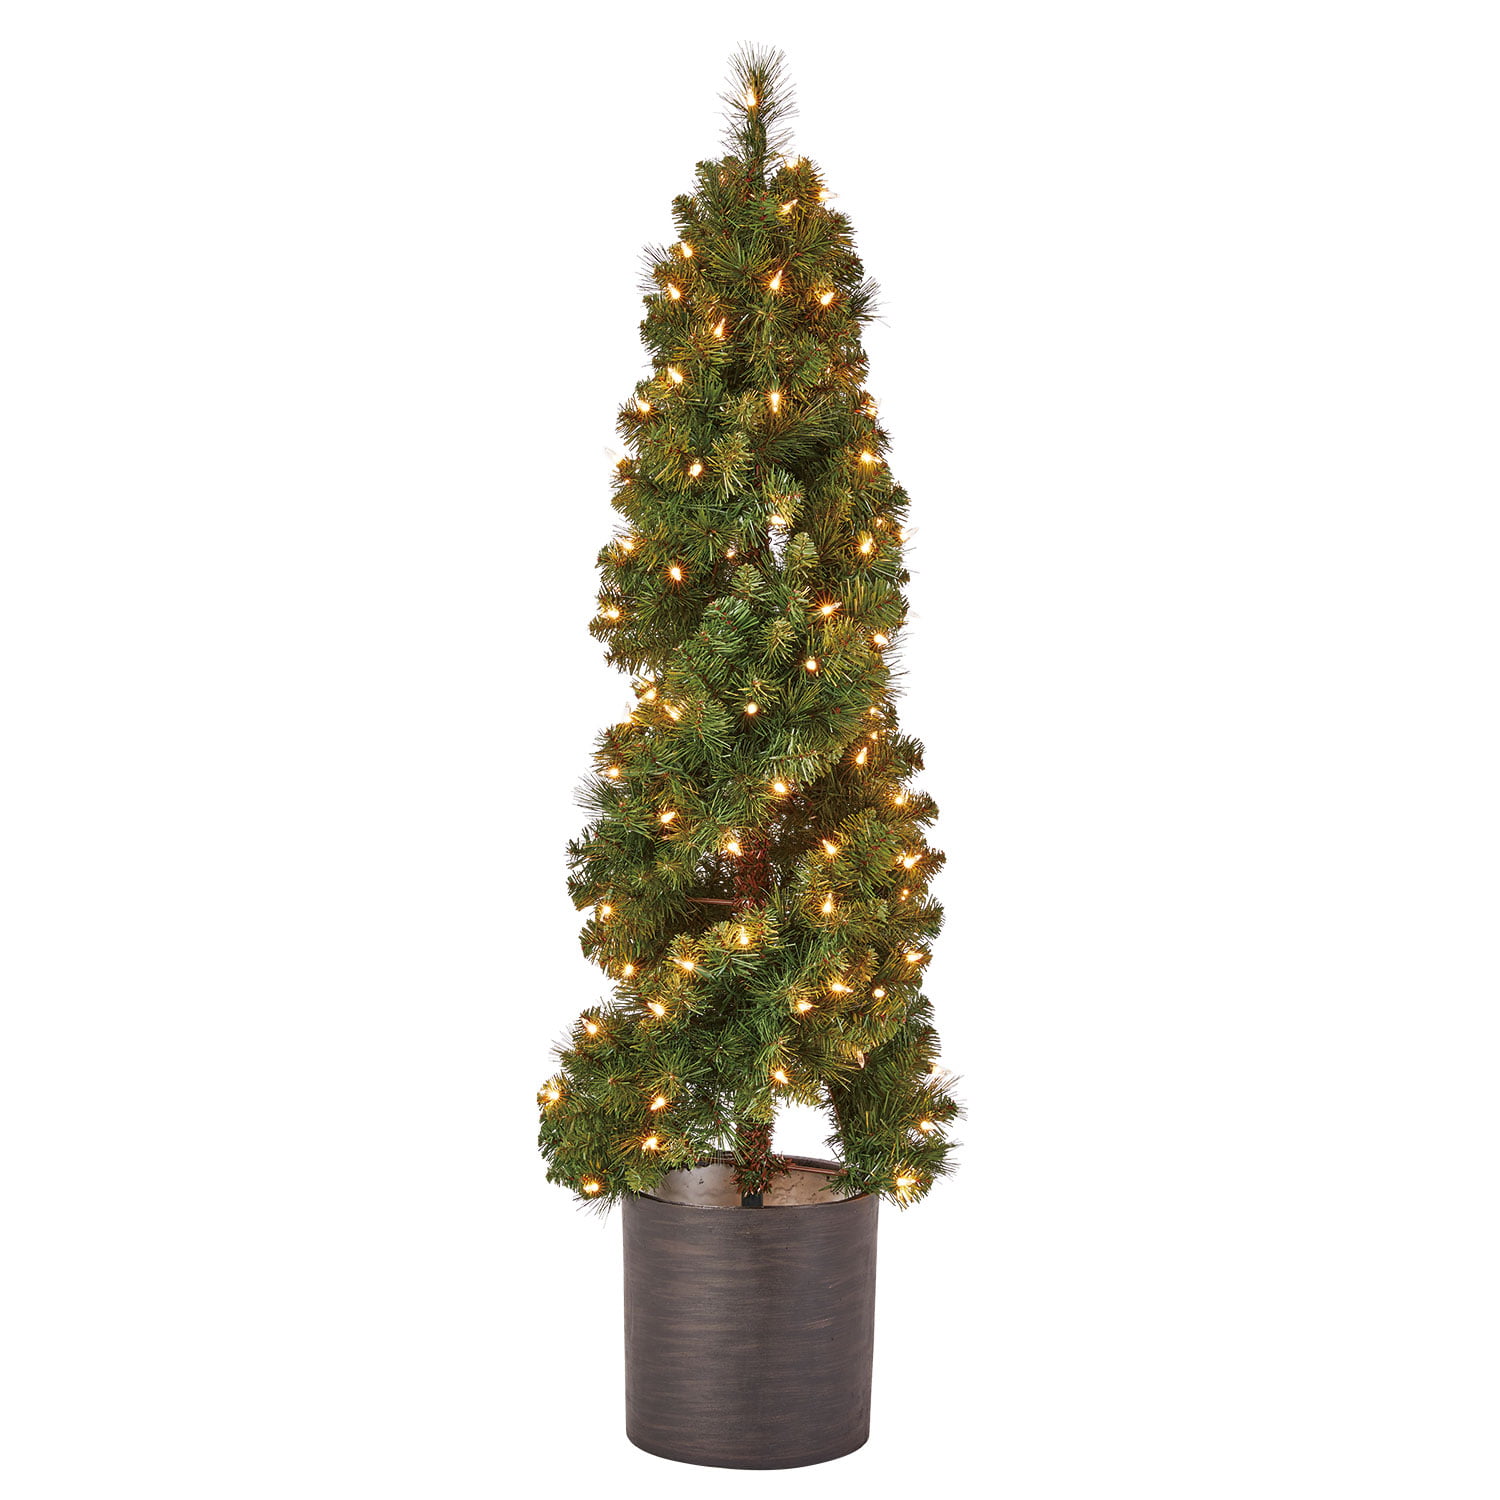 Home Heritage 4 Foot Spiral Design Artificial Topiary Pine Tree w